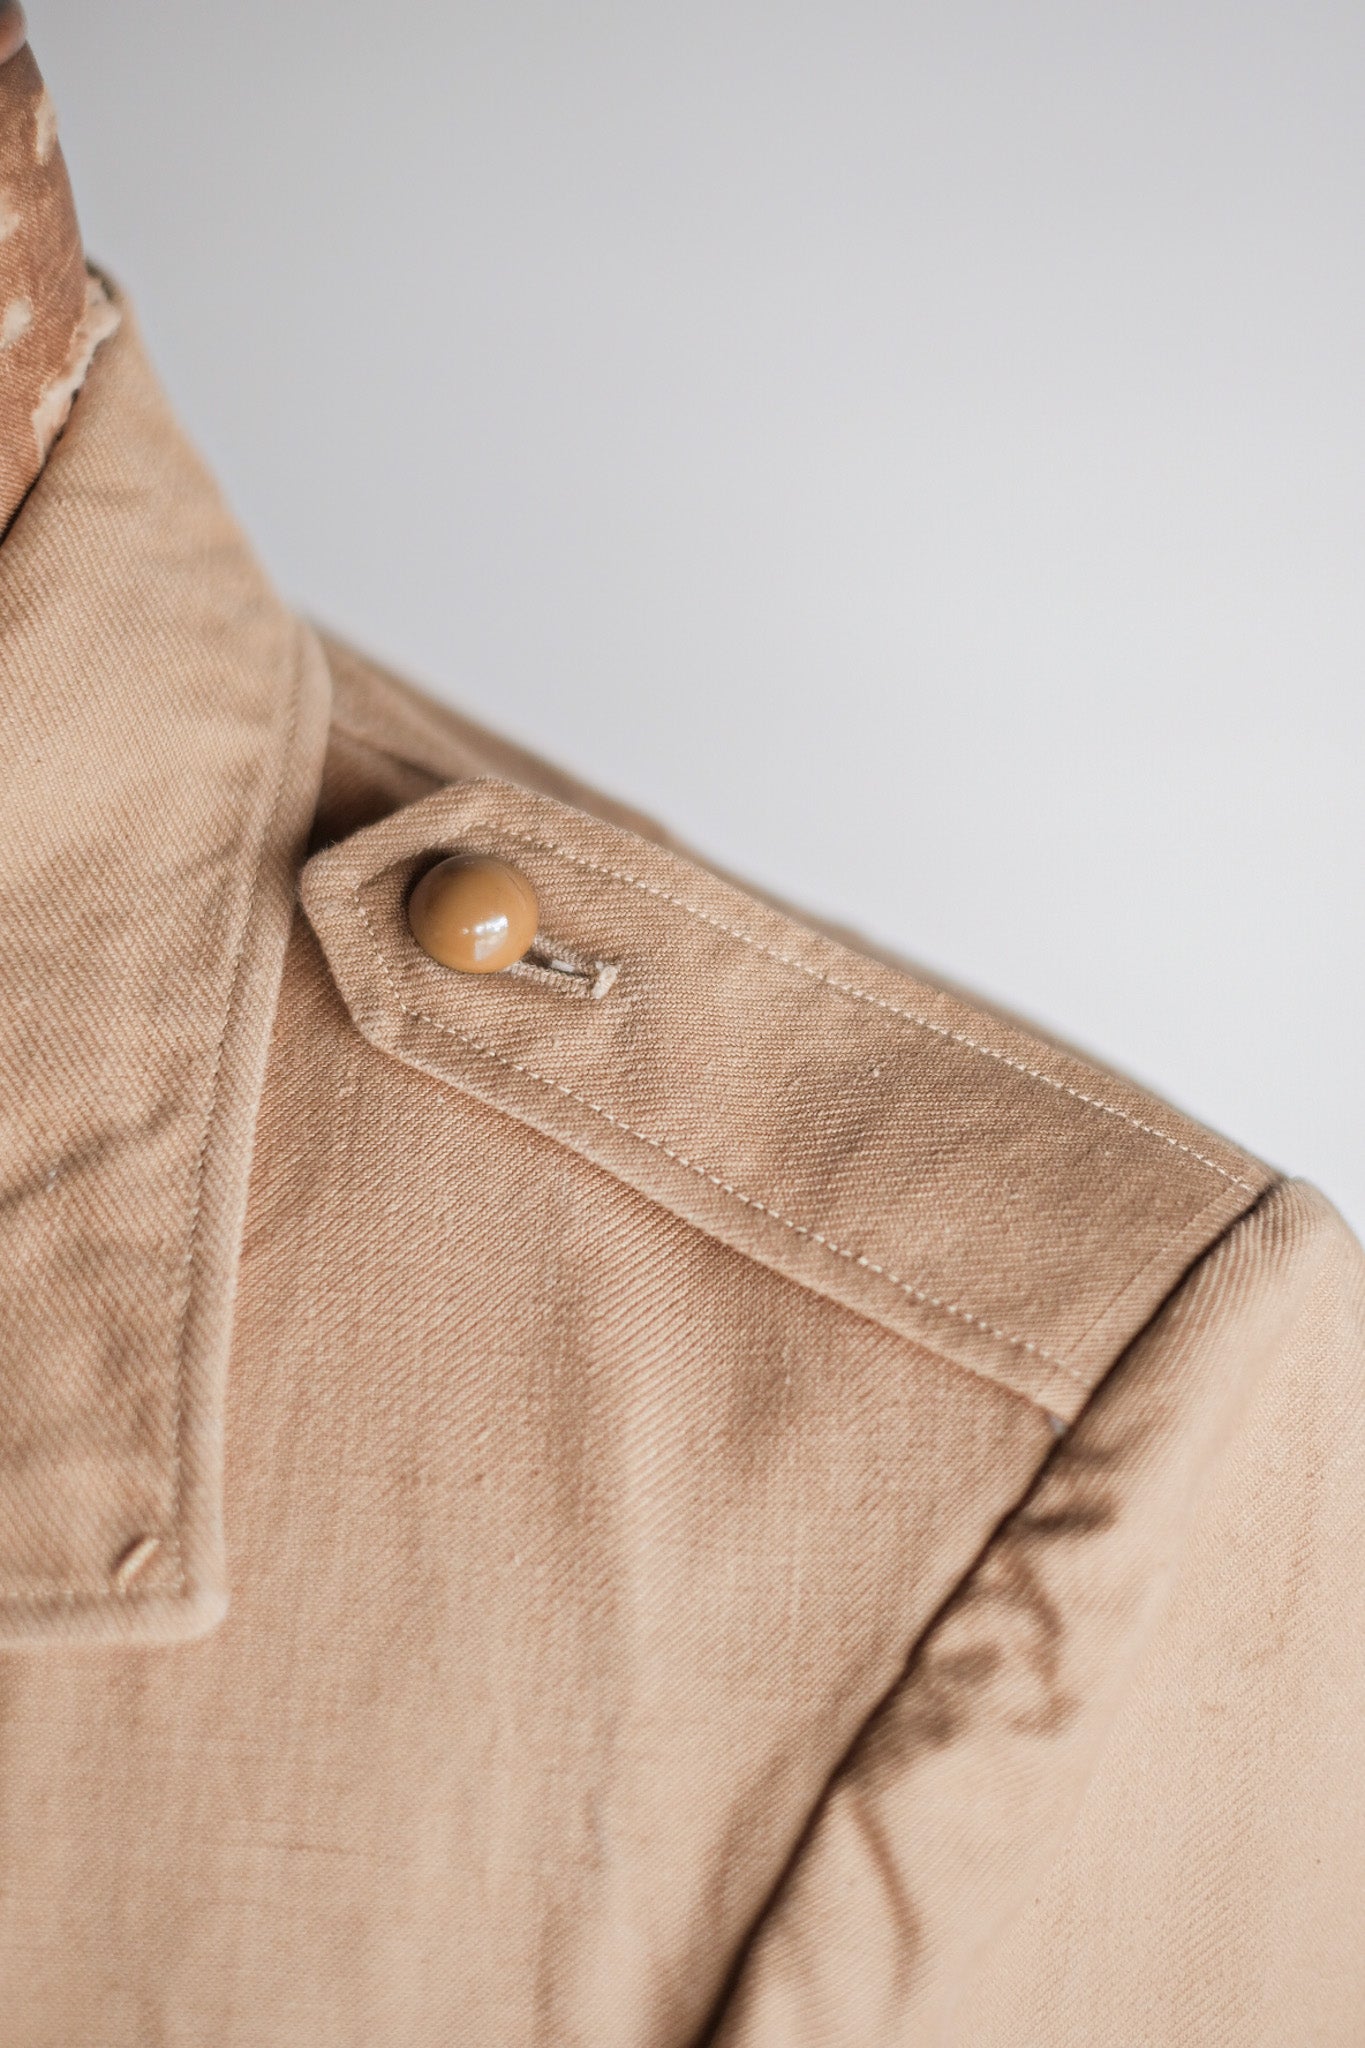 [~ 50's] French Vintage Cotton Linen CHINO JACKET "GARALLY LAFAYETTE" "DEAD STOCK"